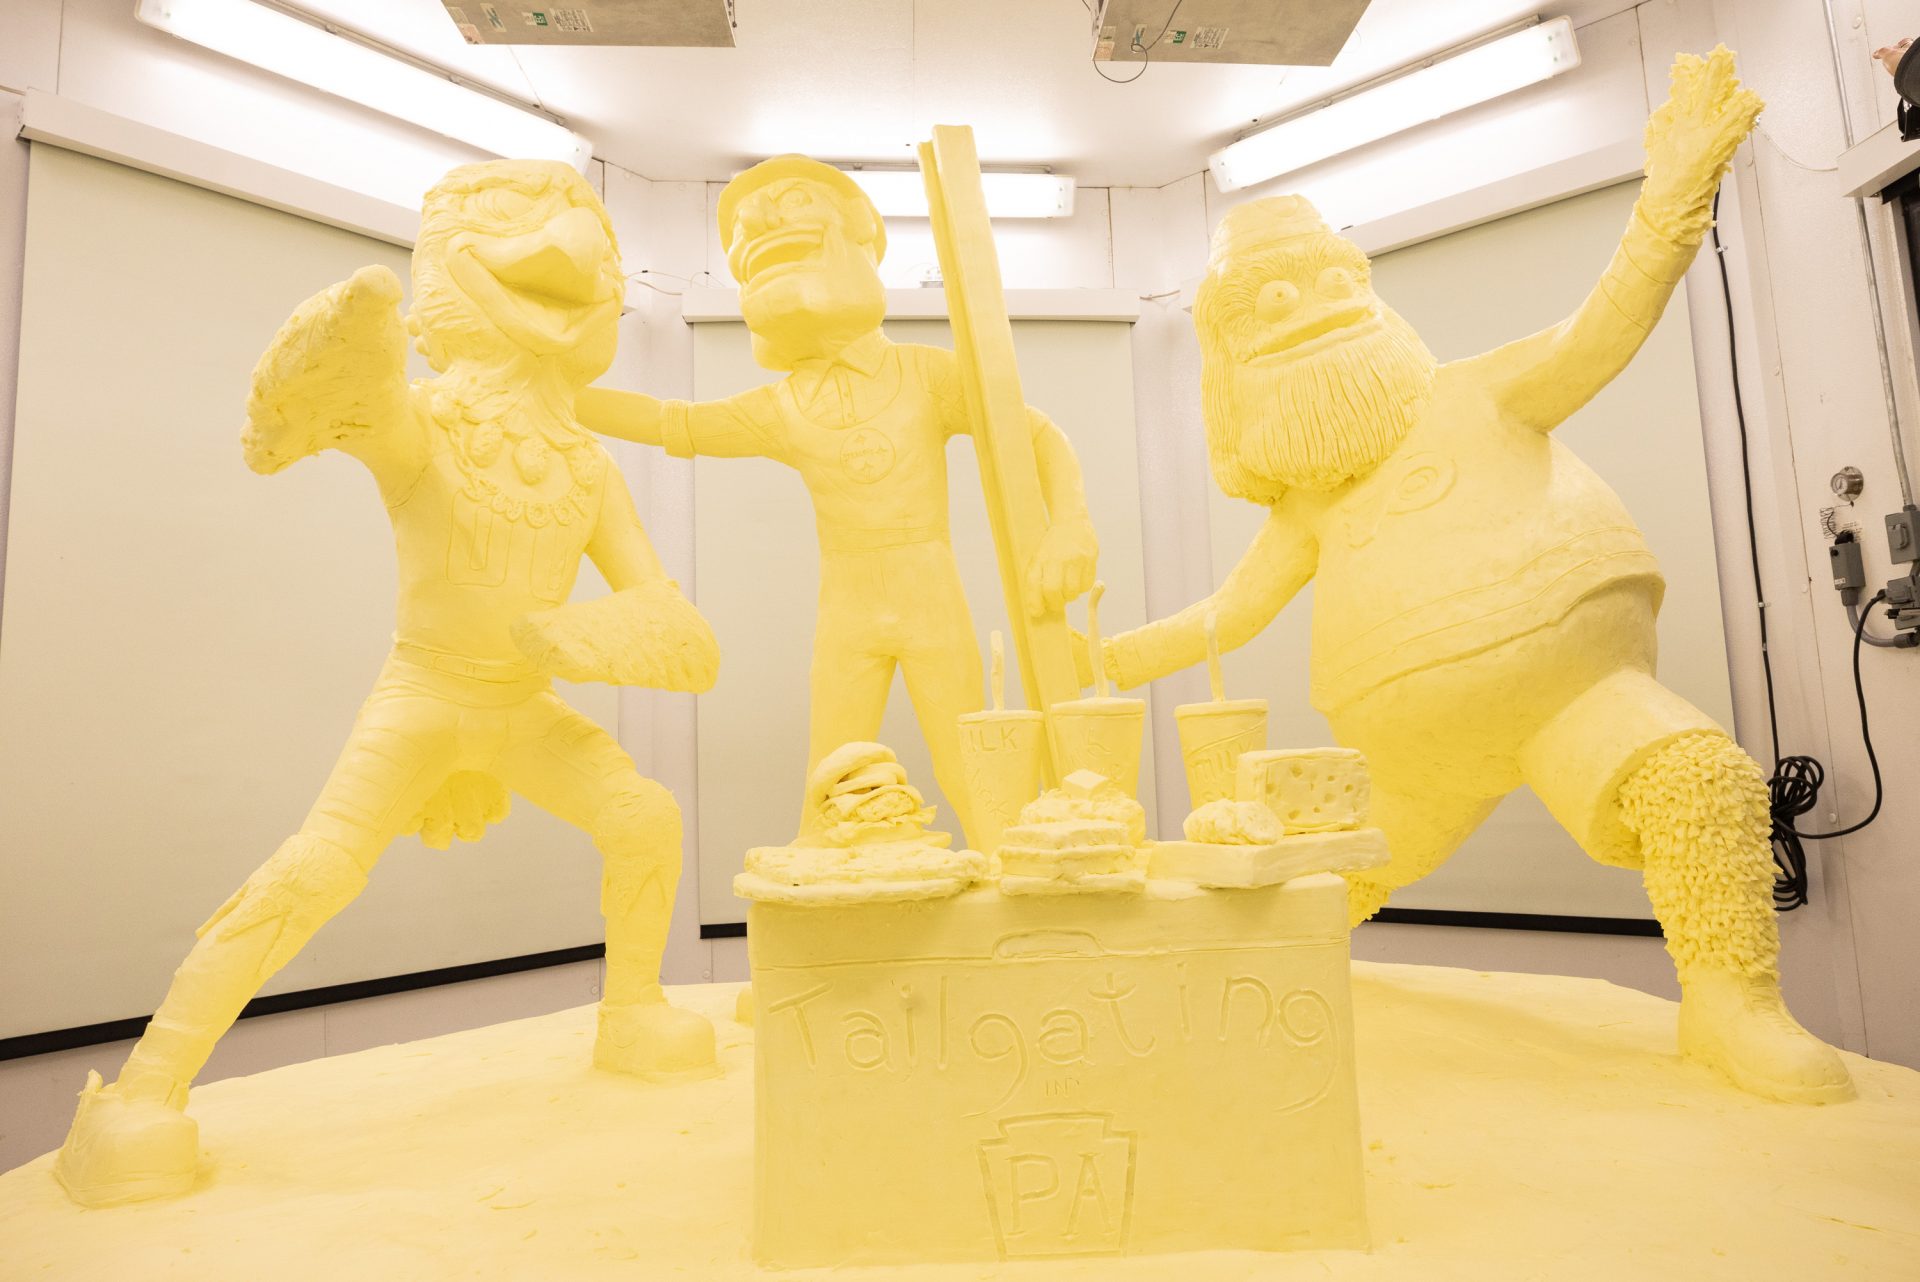 The 2020 Pennsylvania Farm Show butter sculpture, carved from a half-ton of butter, depicts three of Pennsylvania’s beloved professional sports mascots: Philadelphia Flyers’ Gritty, Philadelphia Eagles’ Swoop, and Pittsburgh Steelers’ Steely McBeam celebrating with a spread of Pennsylvania dairy products.